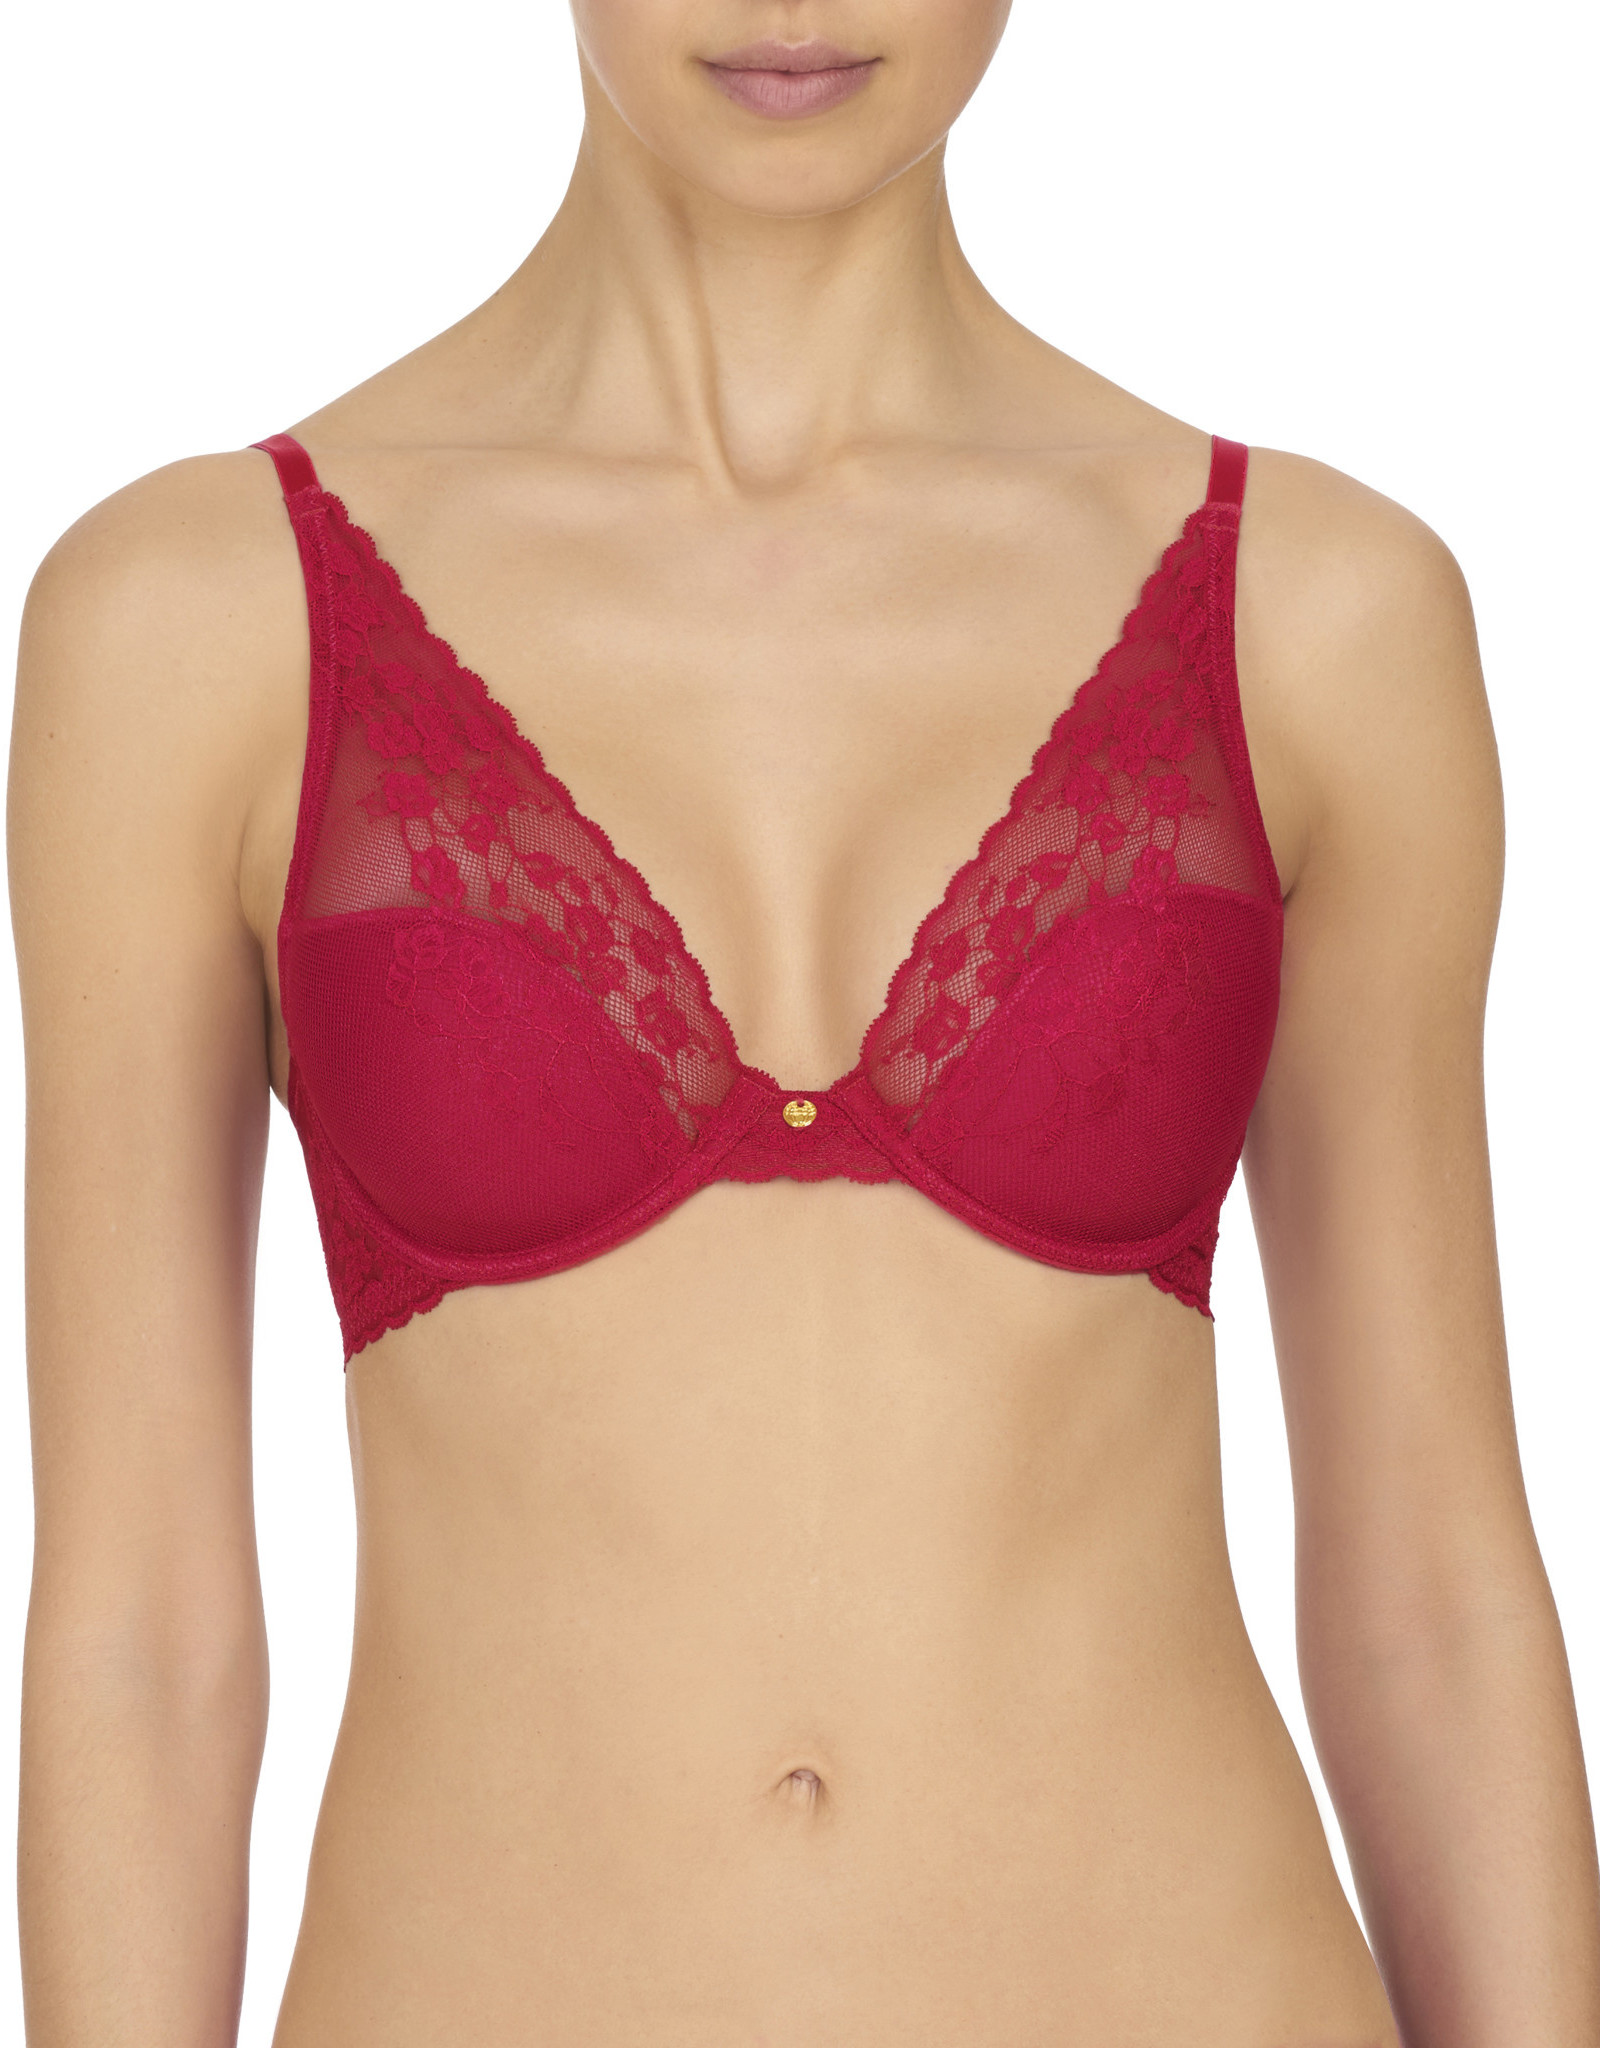 The return of the push-up bra: A trend that triumphs on the red